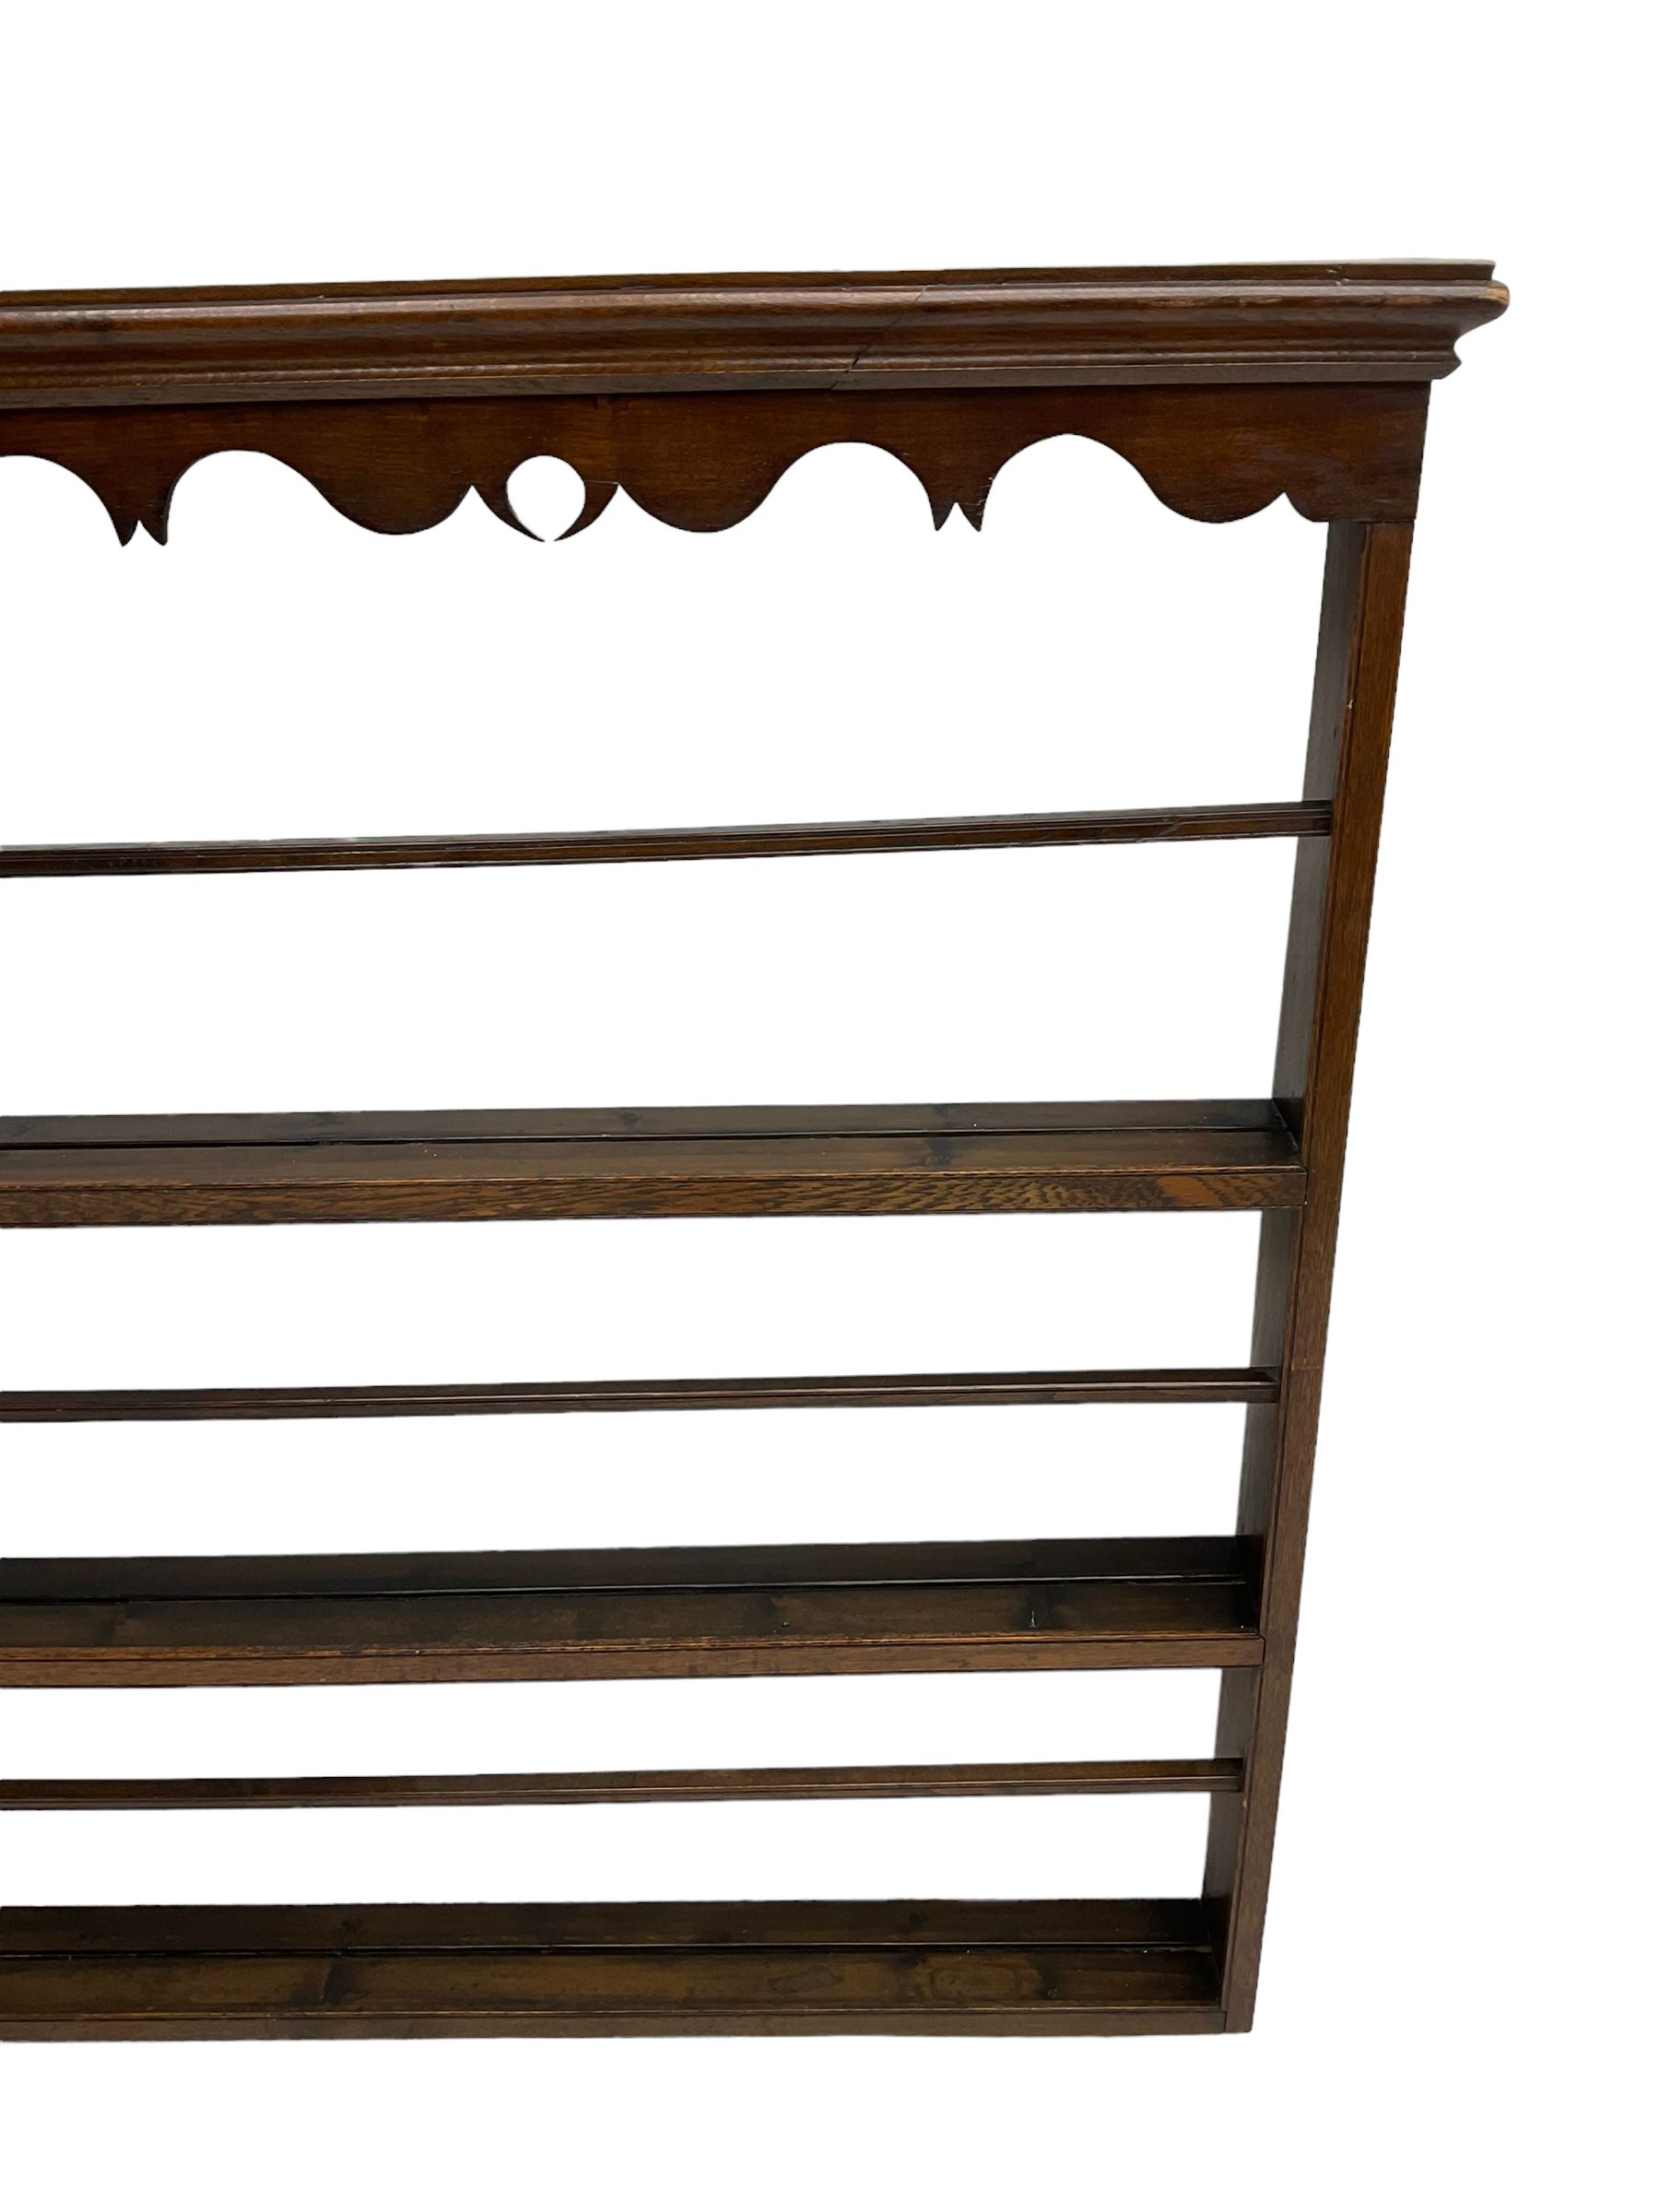 20th century oak wall hanging plate rack - Image 2 of 3